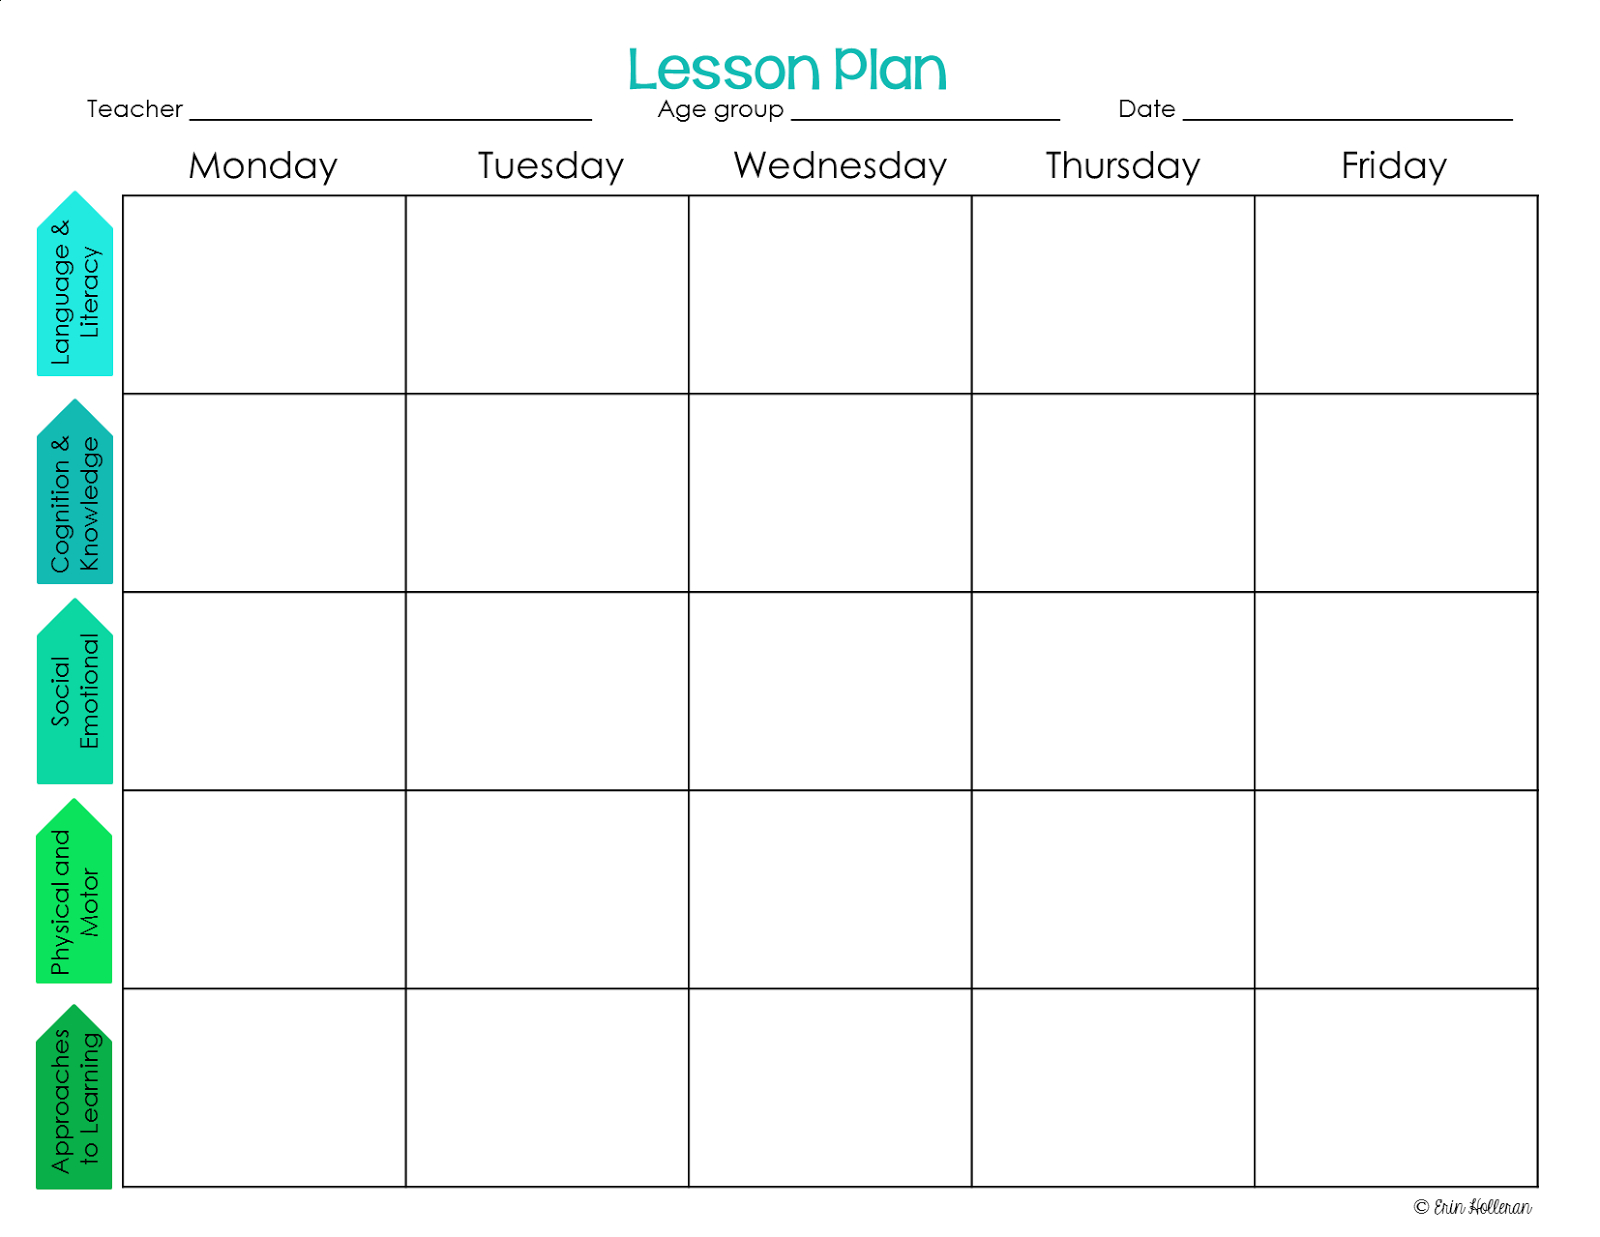 Preschool Ponderings: Make Your Lesson Plans Work For You